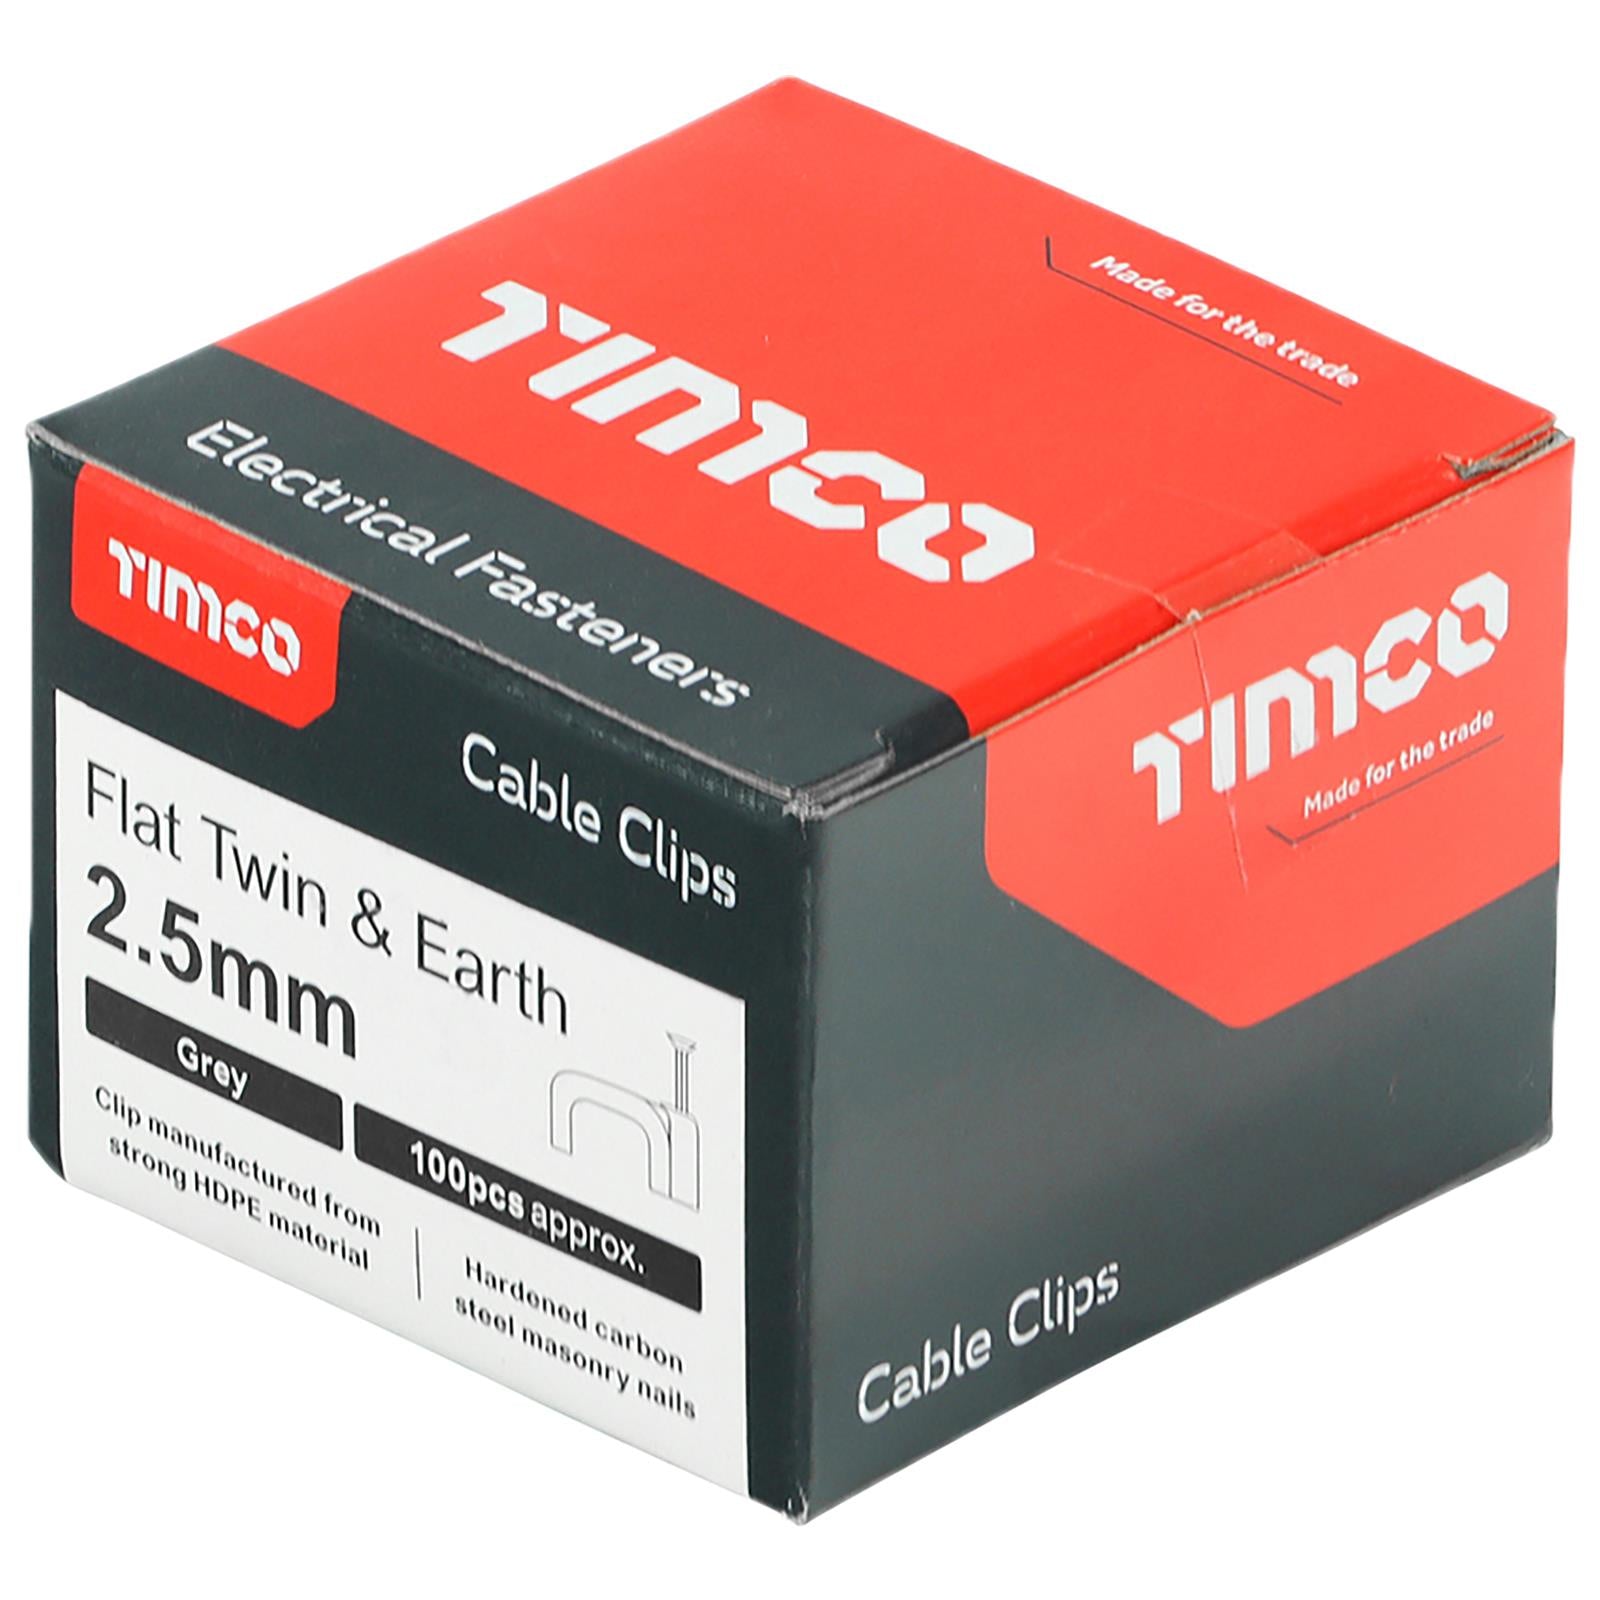 TIMCO Cable Clips Flat Twin and Earth 100 Box 1.5-10mm Choose Size